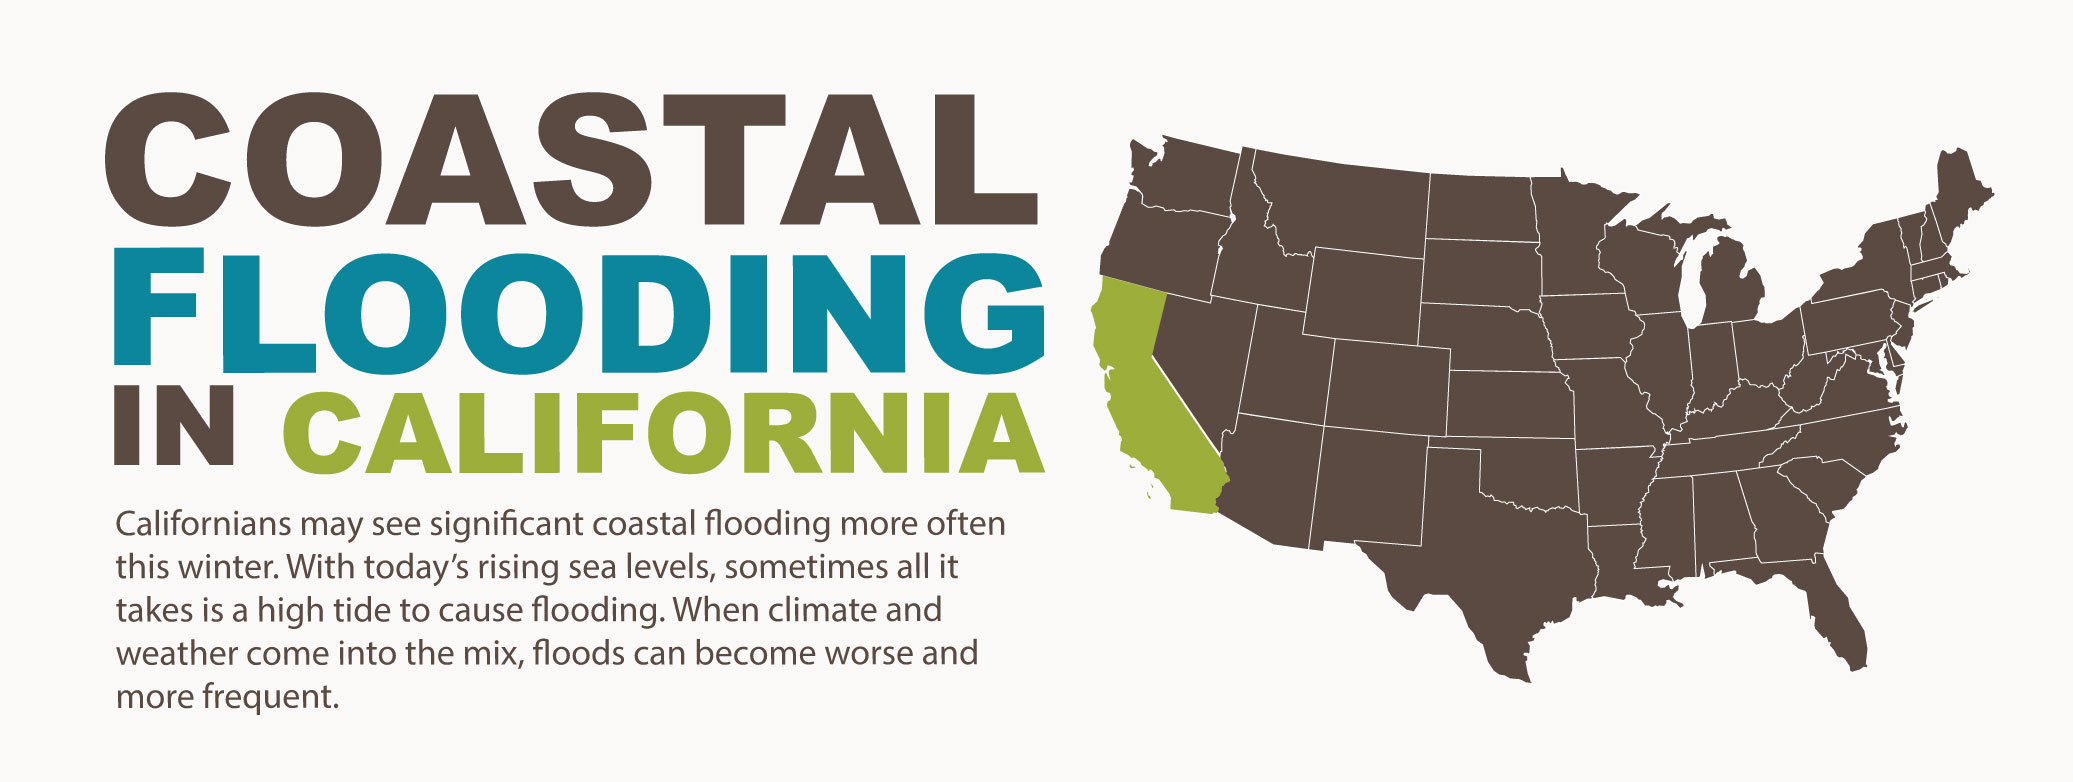 Graphic showing a map of the U.S. with California highlighted. Text: Nuisance Flooding in California. Californians may see significant coastal 'nuisance flooding' more often this wenter. With today's rising sea levels, sometimes all it takes is a high tide to cause this minor flooding. When climate and weather come into the mix, nuisance floods can become worse and more frequent. 